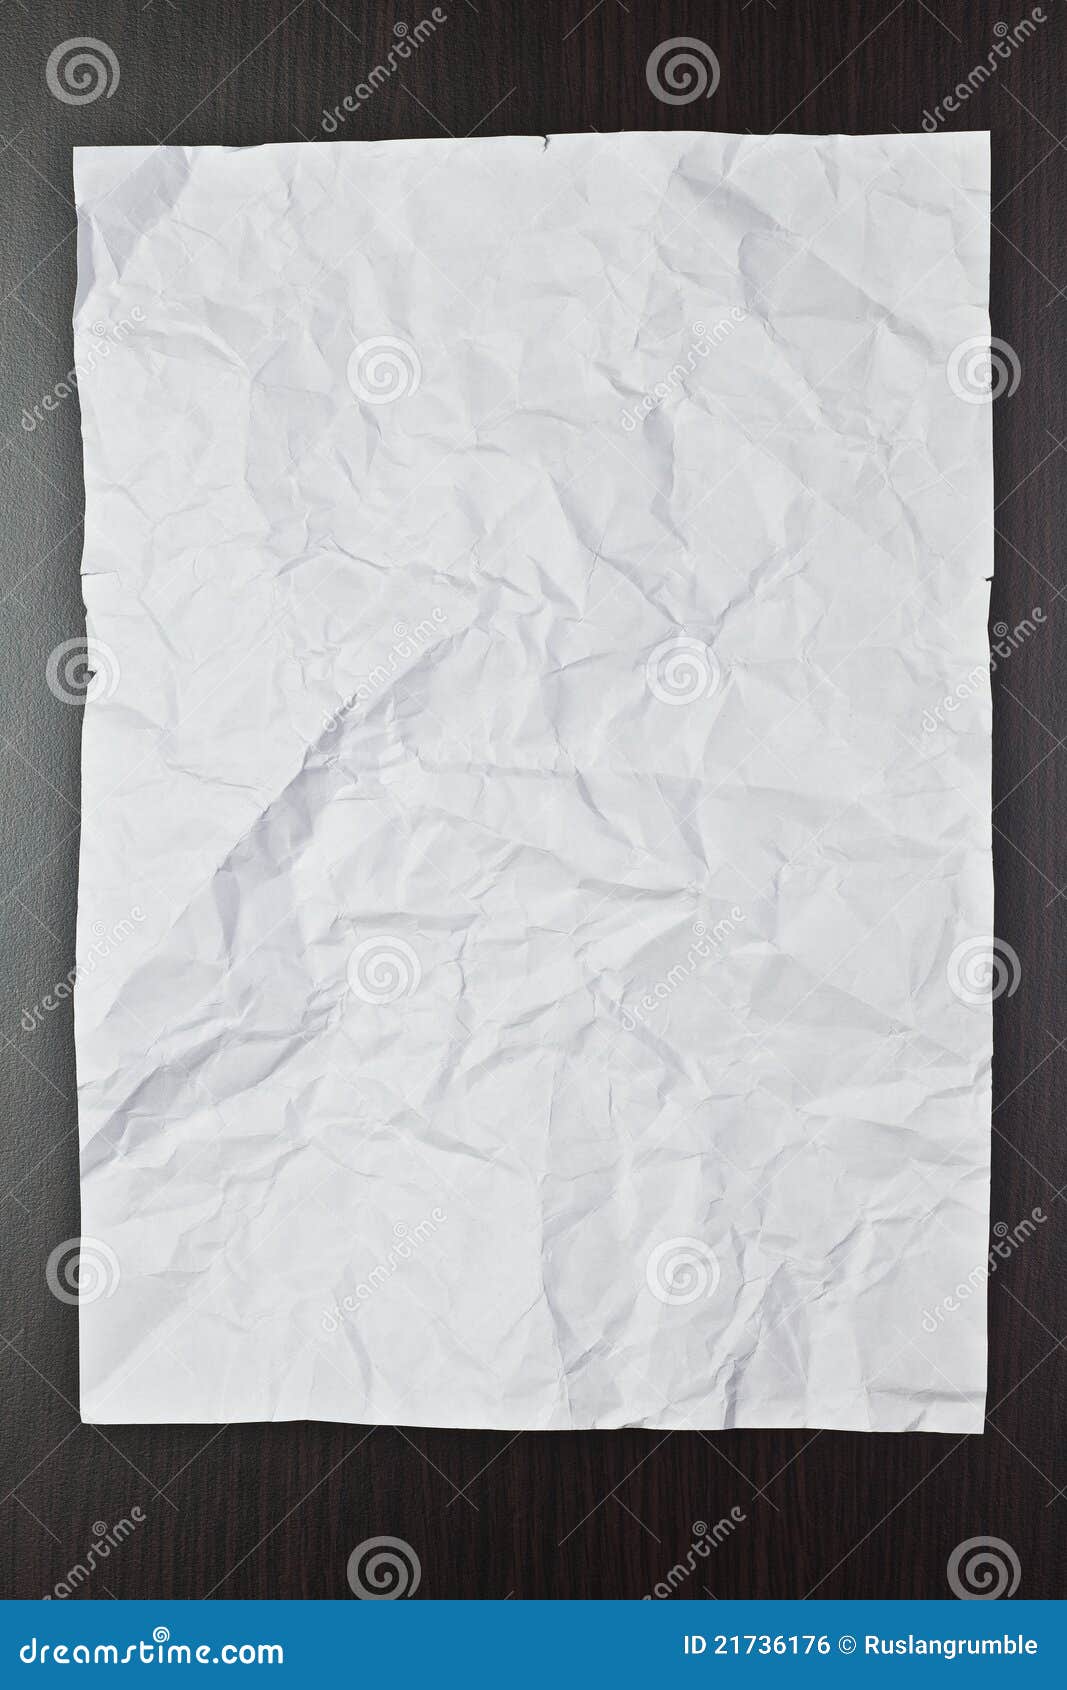 jammed sheet of paper on the table